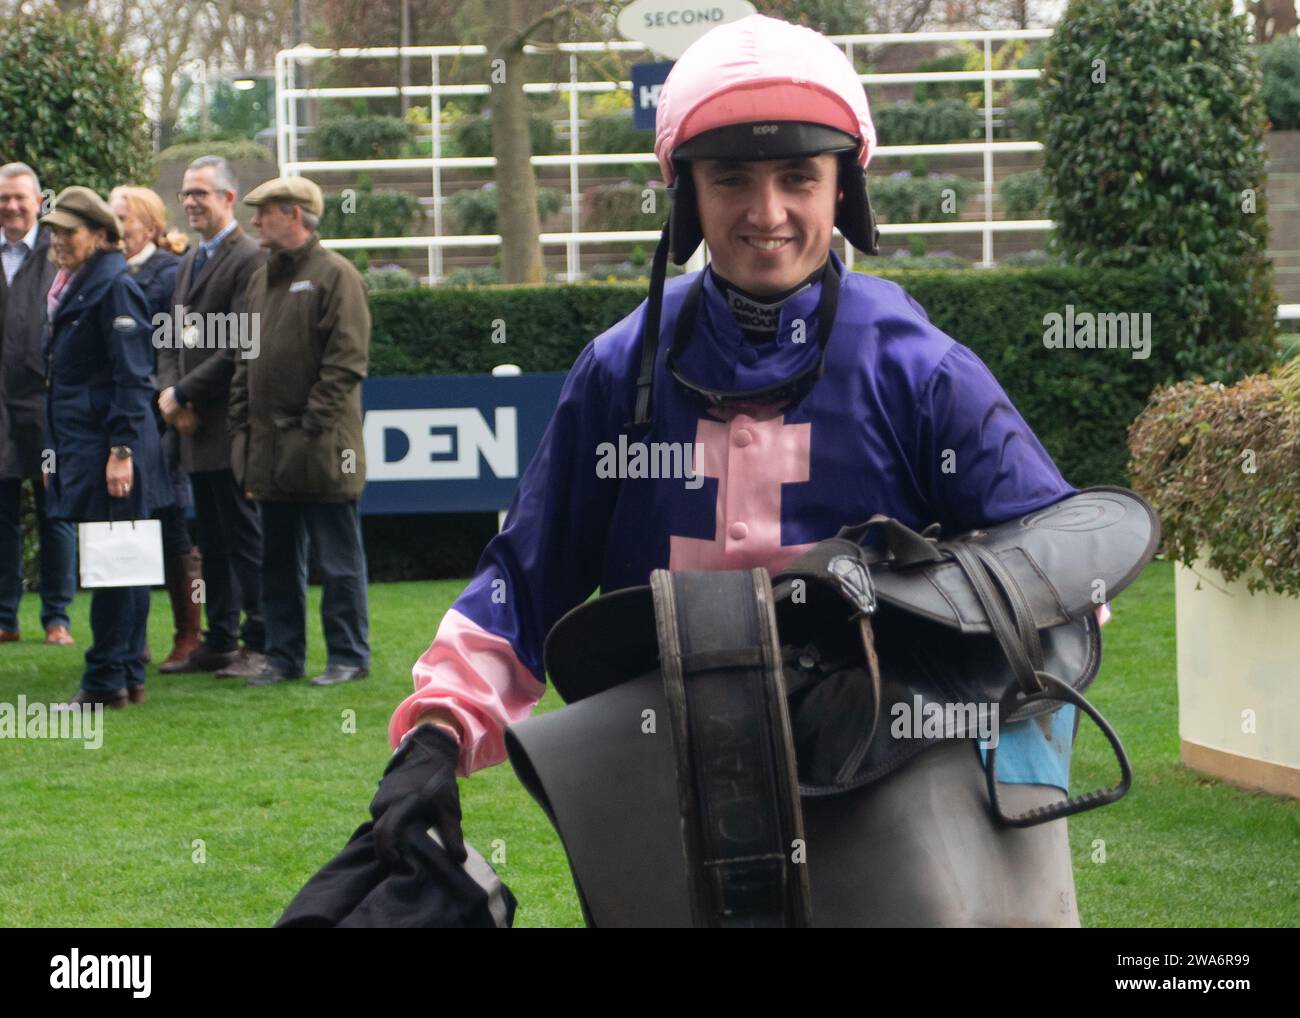 Ascot, Berkshire, UK. 22nd December, 2023. Jockey Charlie Hammond came second riding horse Toonagh Warrior in the WB Wealth Handicap Hurdle Race at the Howden Christmas Racing Weekend. at Ascot Racecourse. Credit: Maureen McLean/Alamy Stock Photo